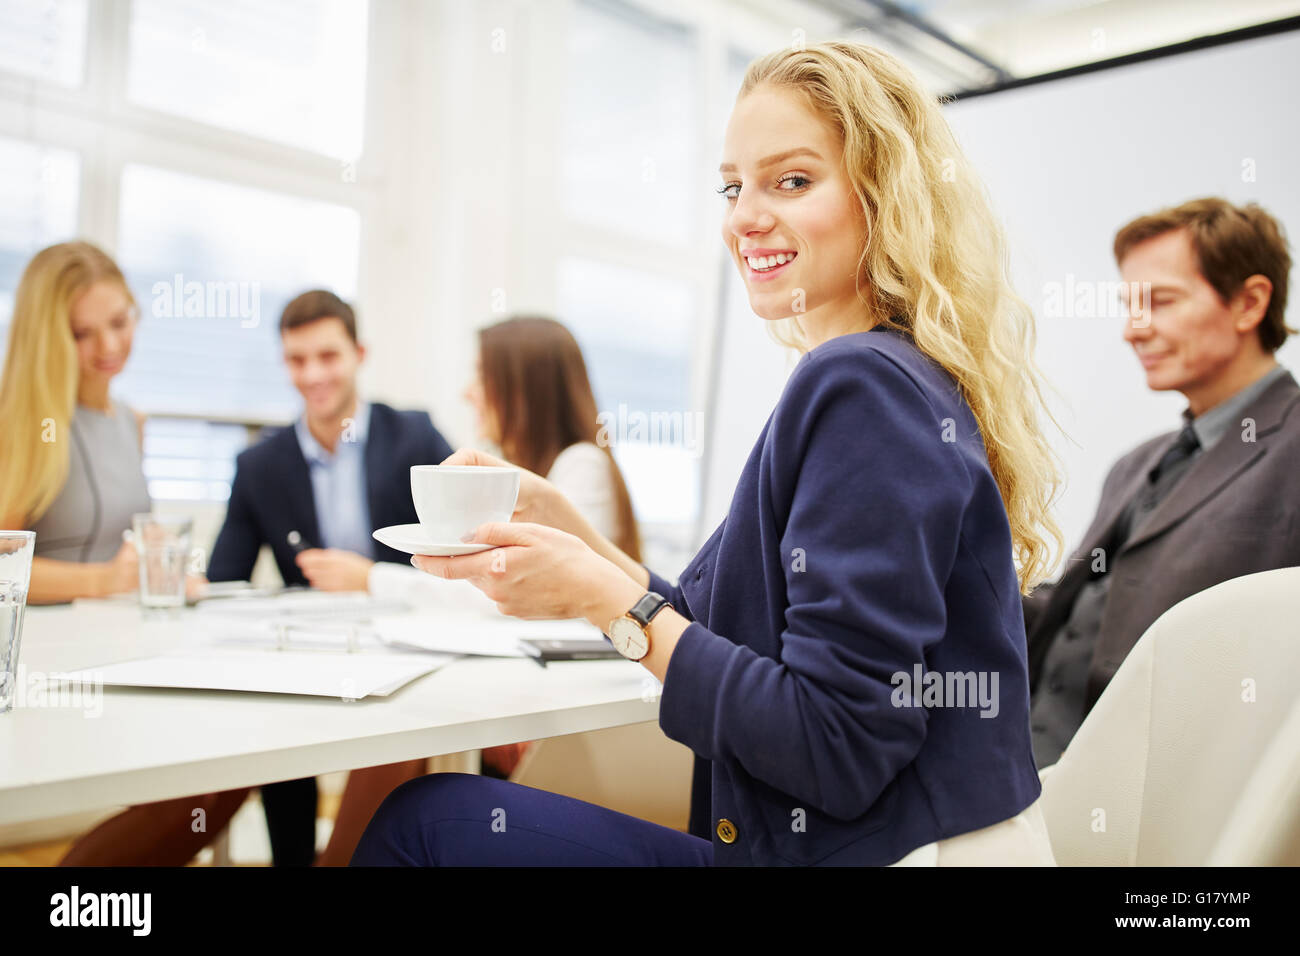 Young businesswoman drinking coffee in a business meeting Stock Photo